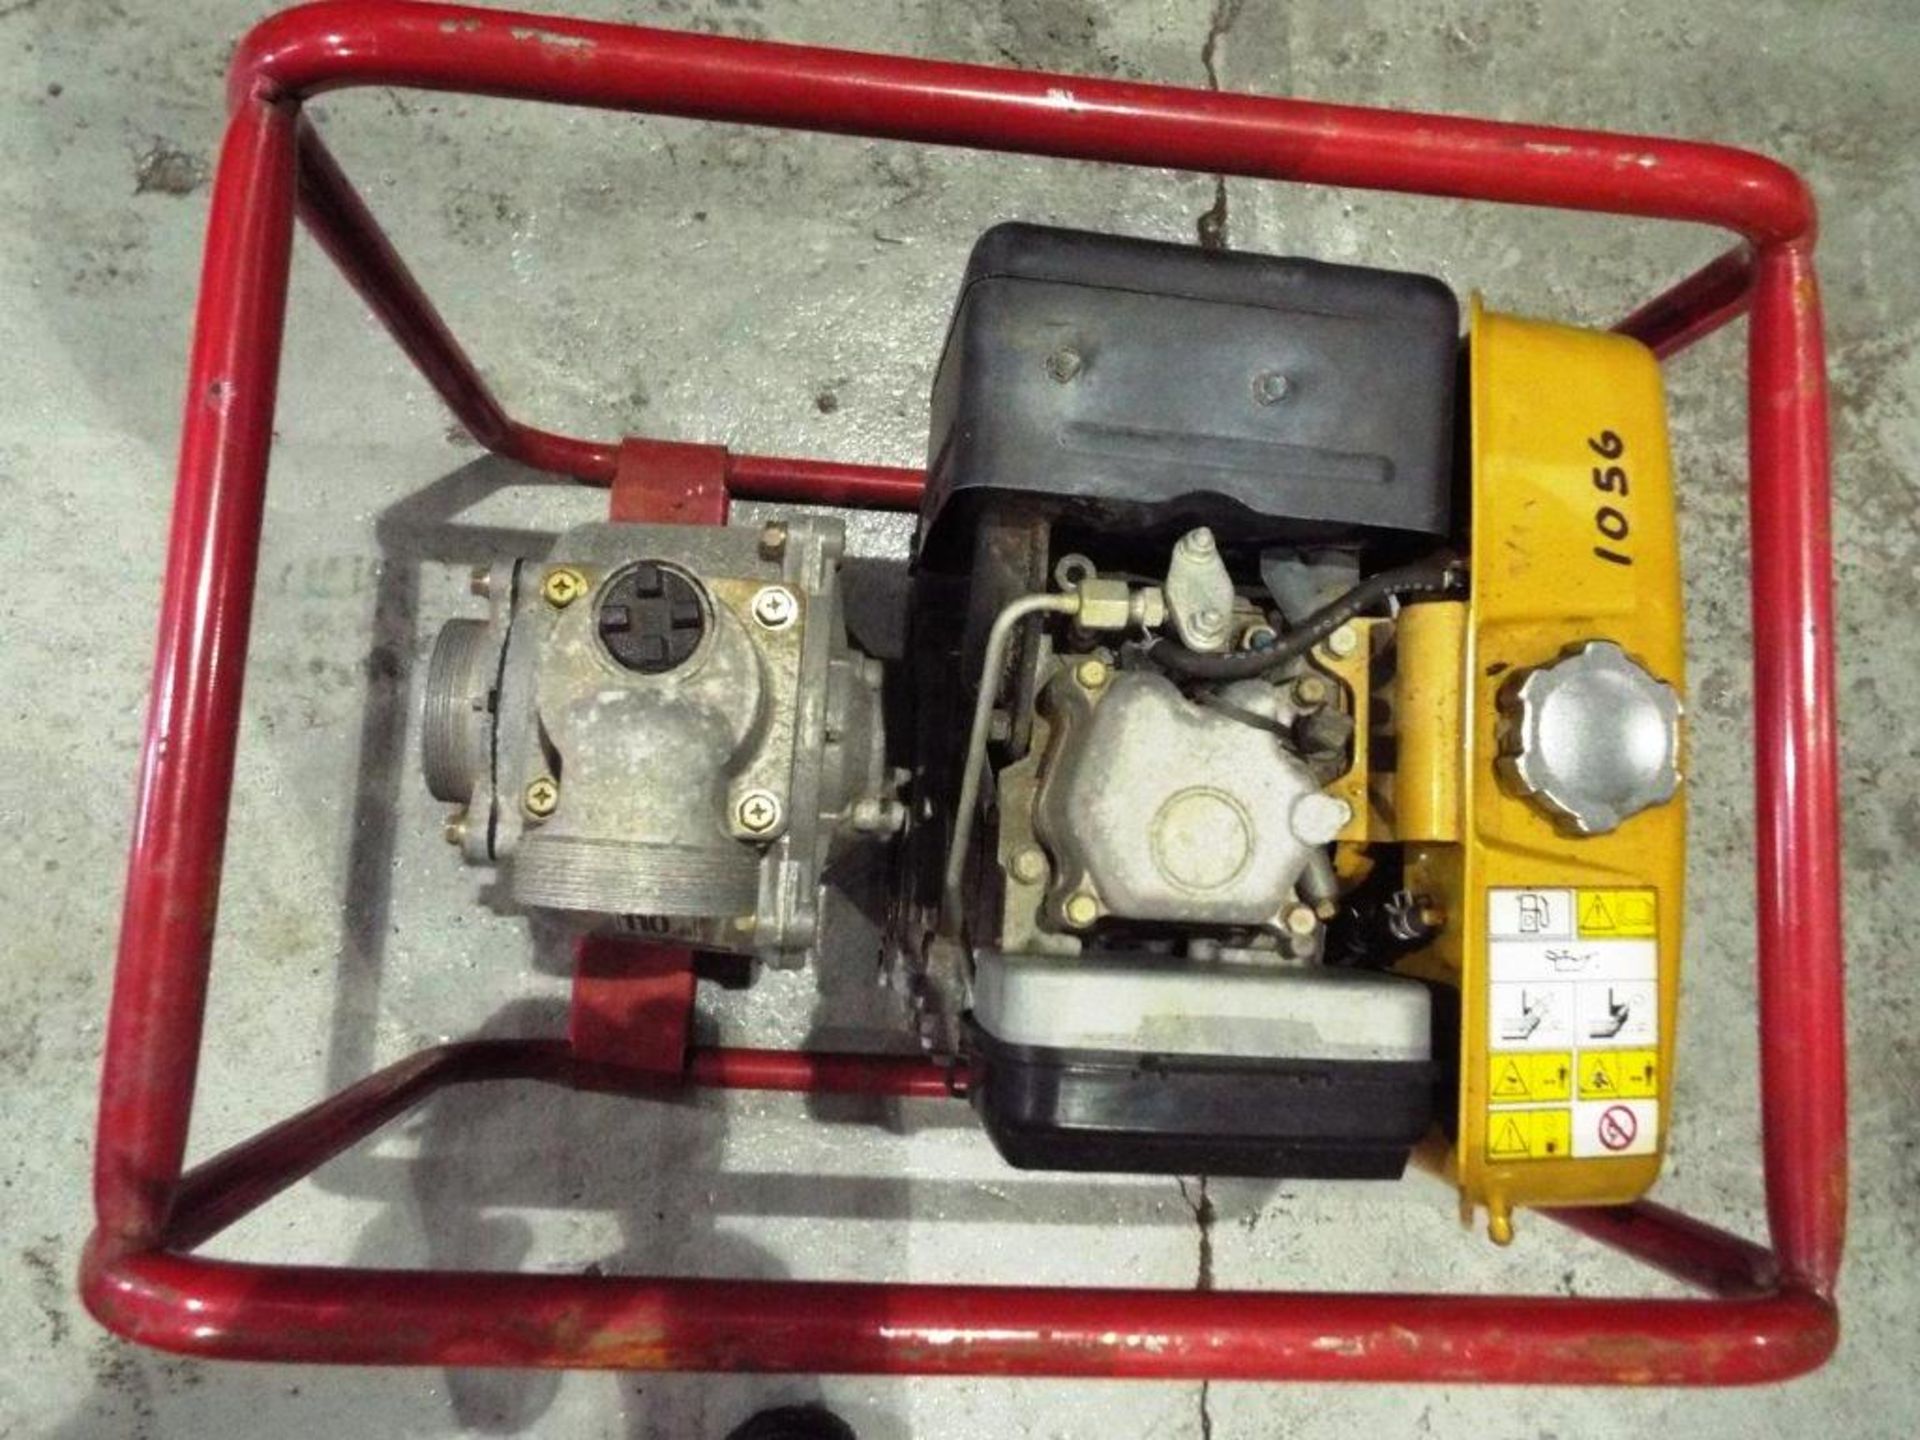 Robin DY23 Powered Clarke CRD3 Water Pump - Image 6 of 11